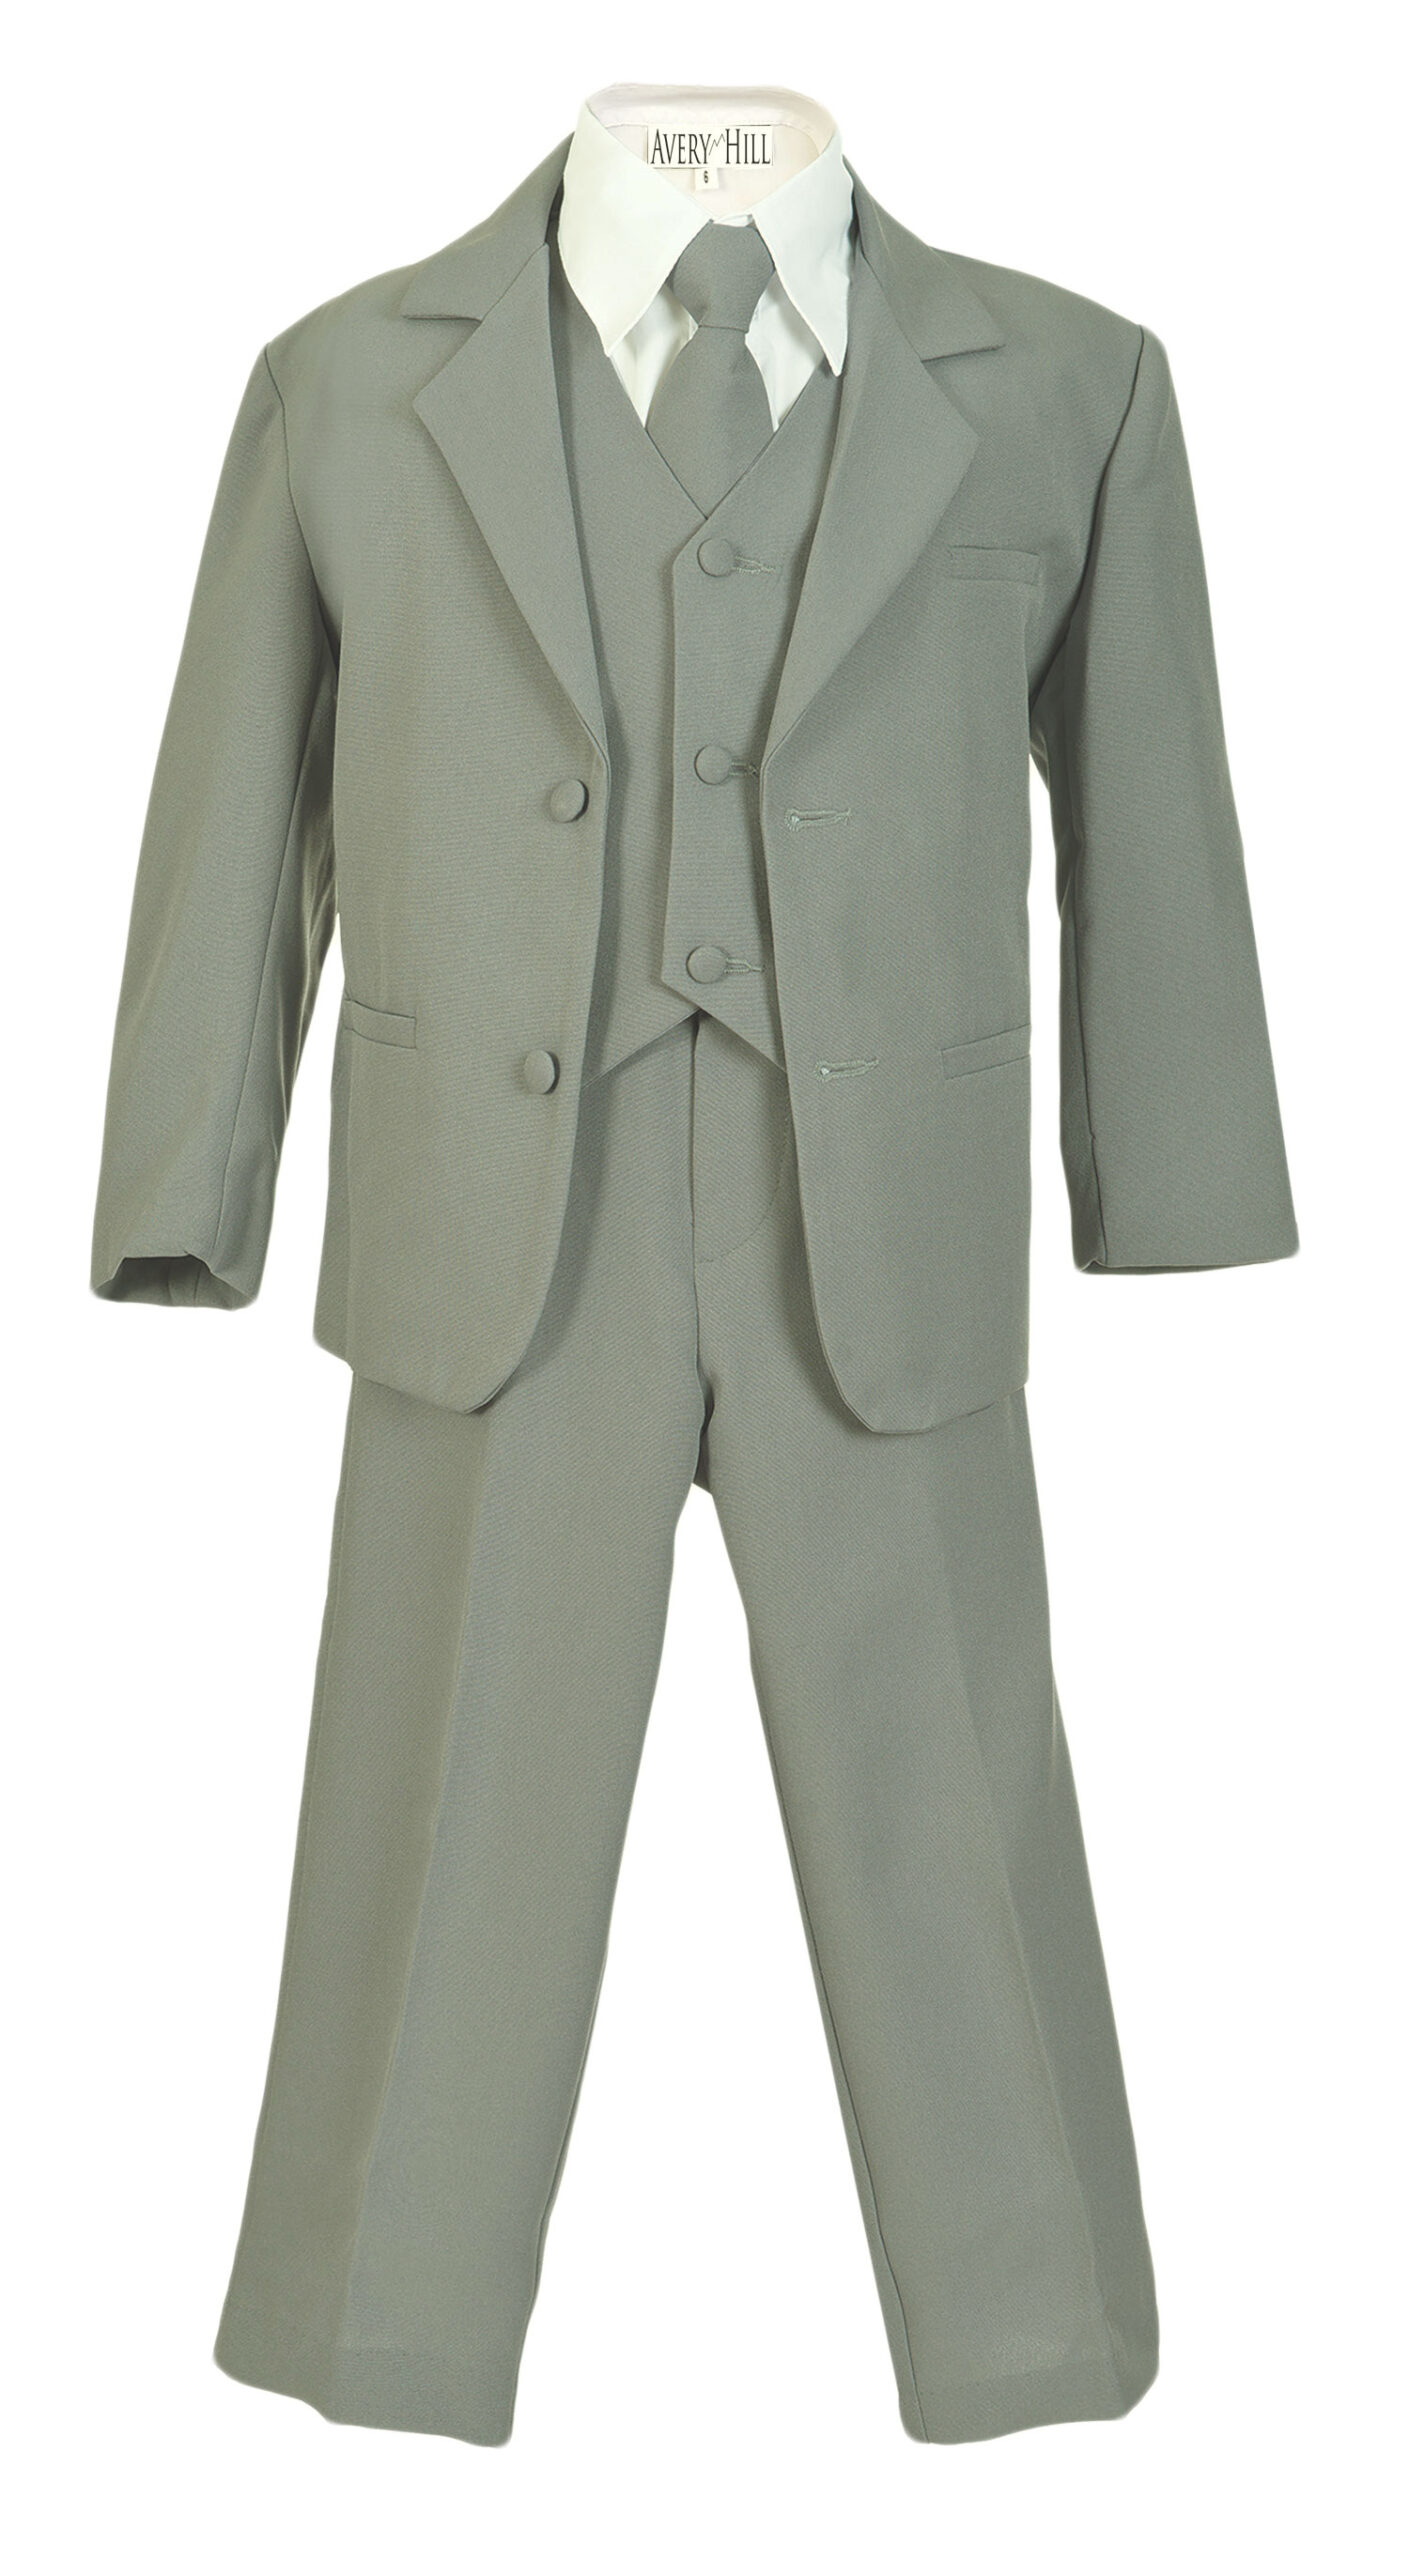 Avery Hill Boys Formal 5 Piece Suit with Shirt and Vest Silver White - 8